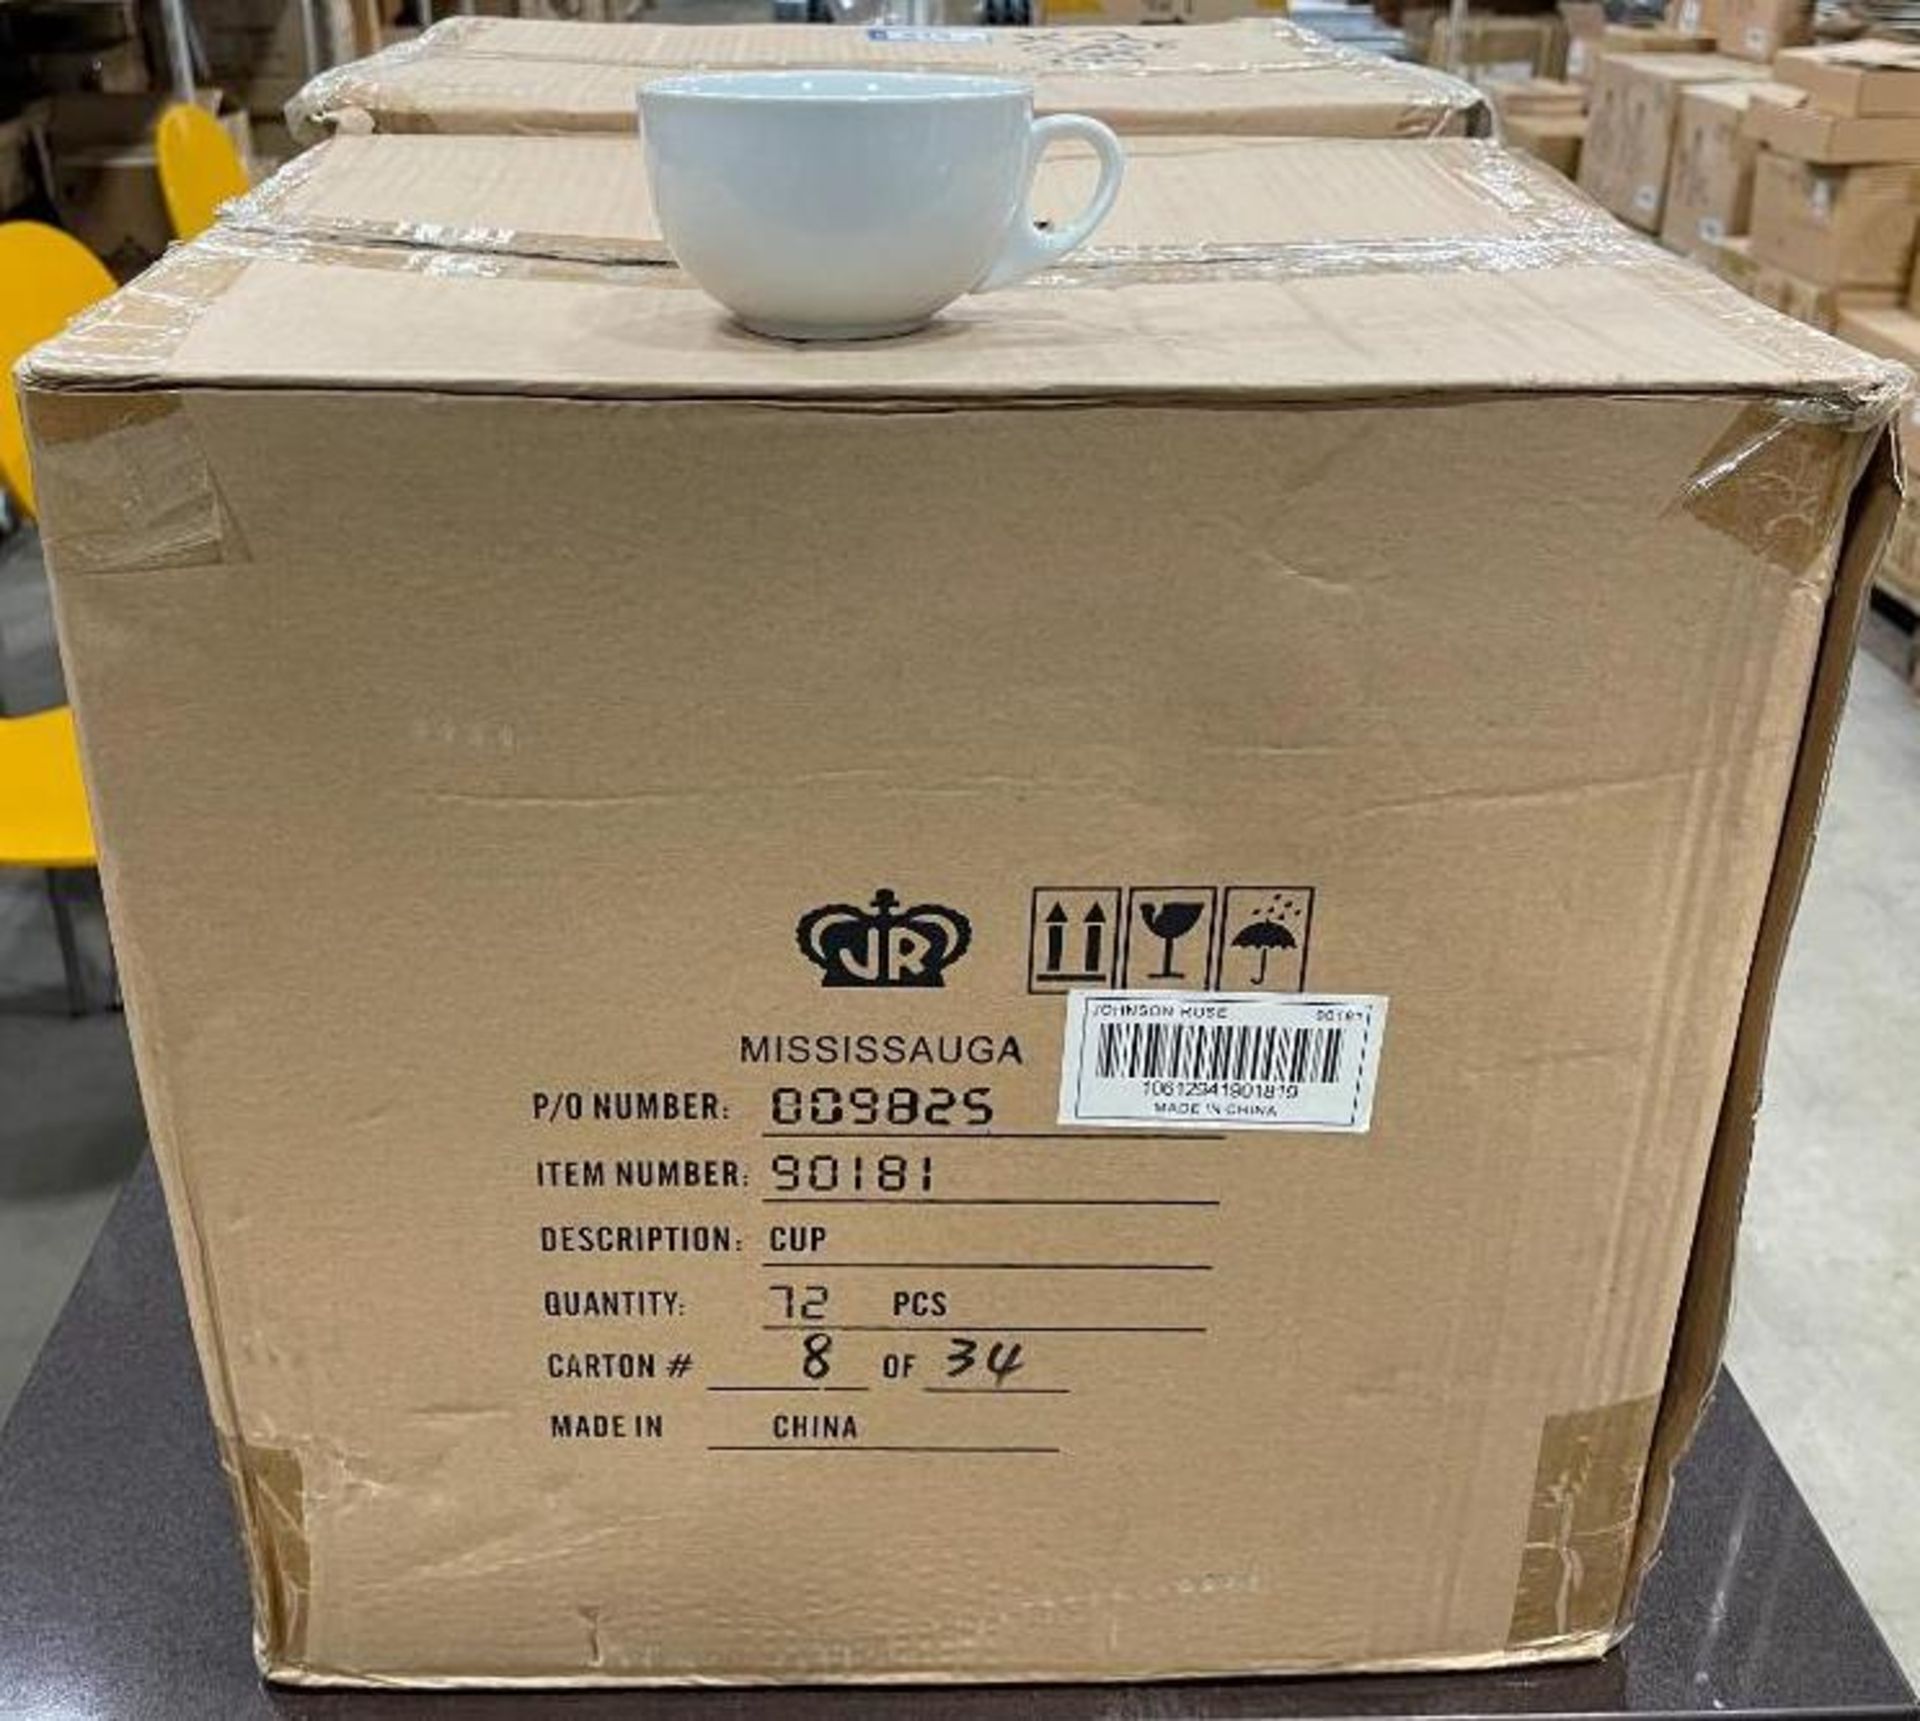 2 CASES OF 7 OZ. TAPERED COFFEE CUP, 72/CASE, JOHNSON ROSE 90181 - NEW